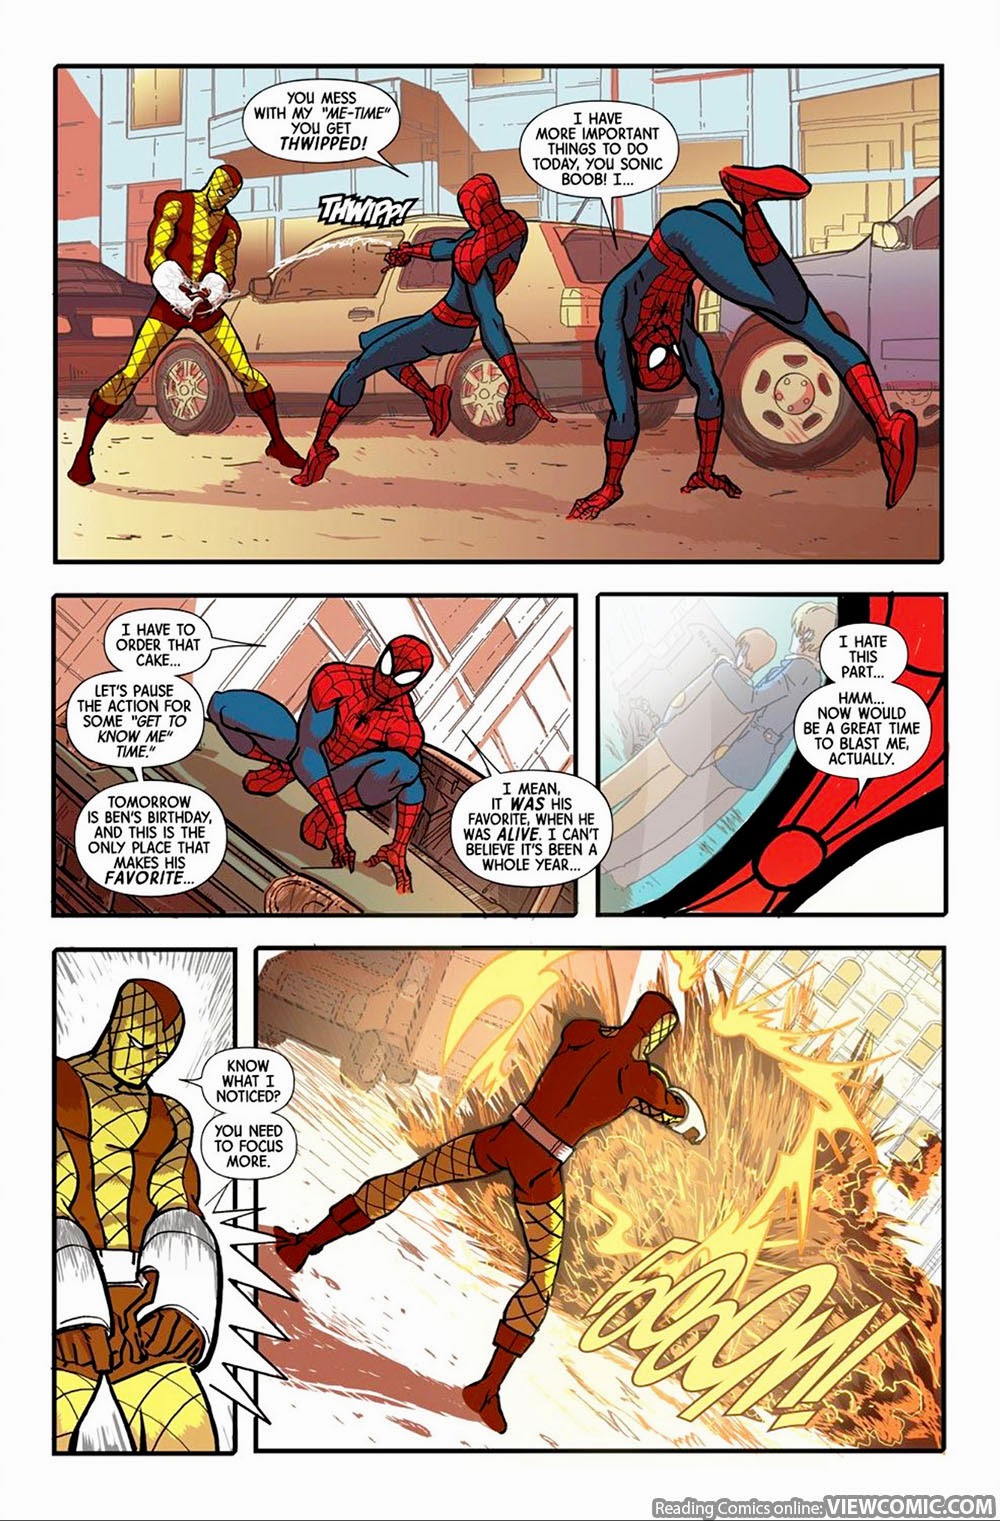 Marvel Universe Ultimate Spider Man 001 2012 | Read Marvel Universe  Ultimate Spider Man 001 2012 comic online in high quality. Read Full Comic  online for free - Read comics online in high quality .|